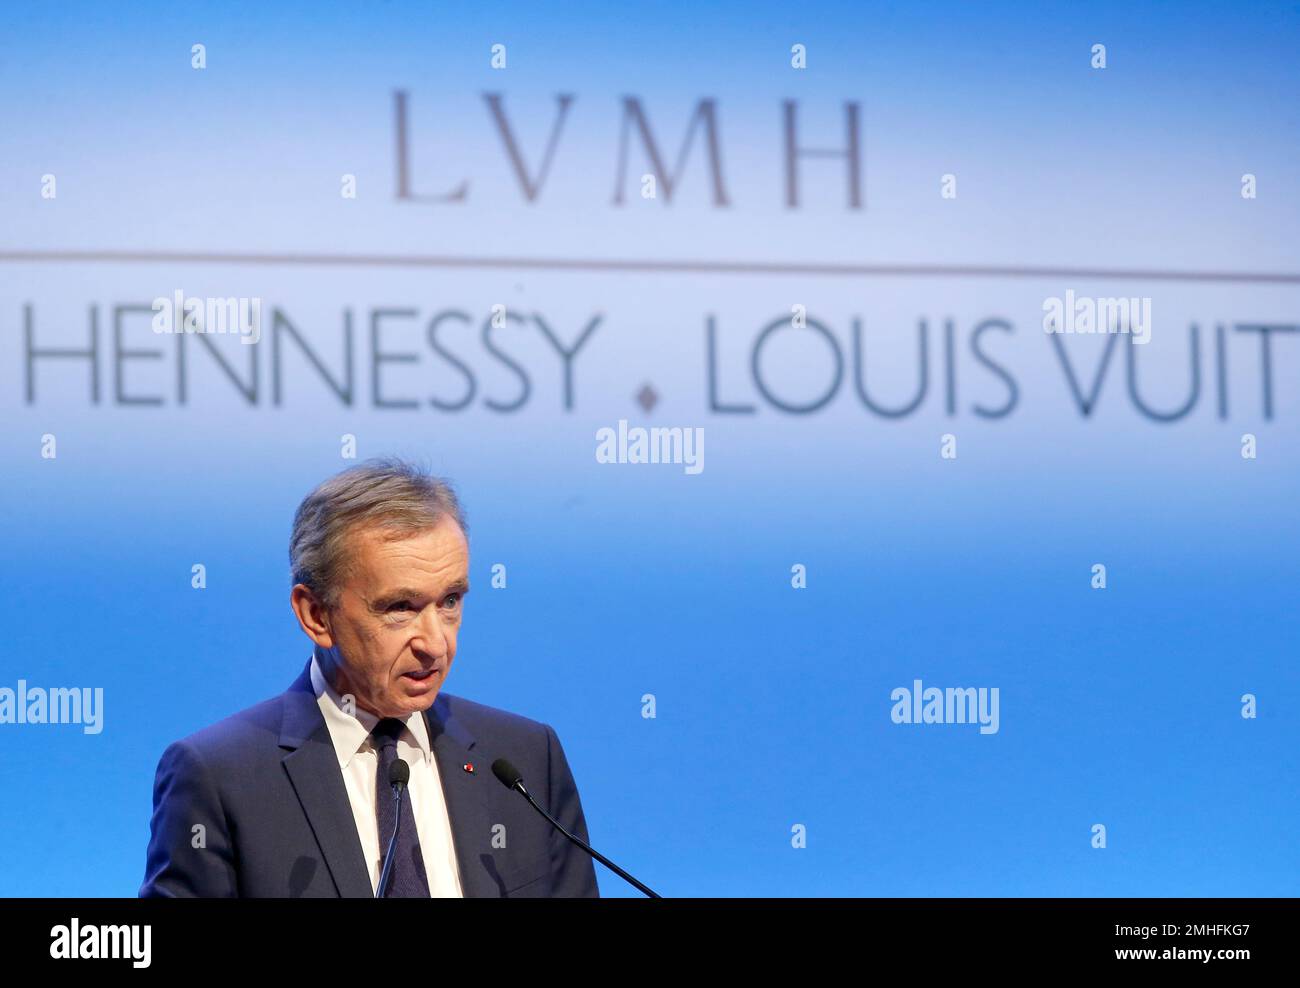 LVMH on X: The LVMH Group celebrates the inauguration of the